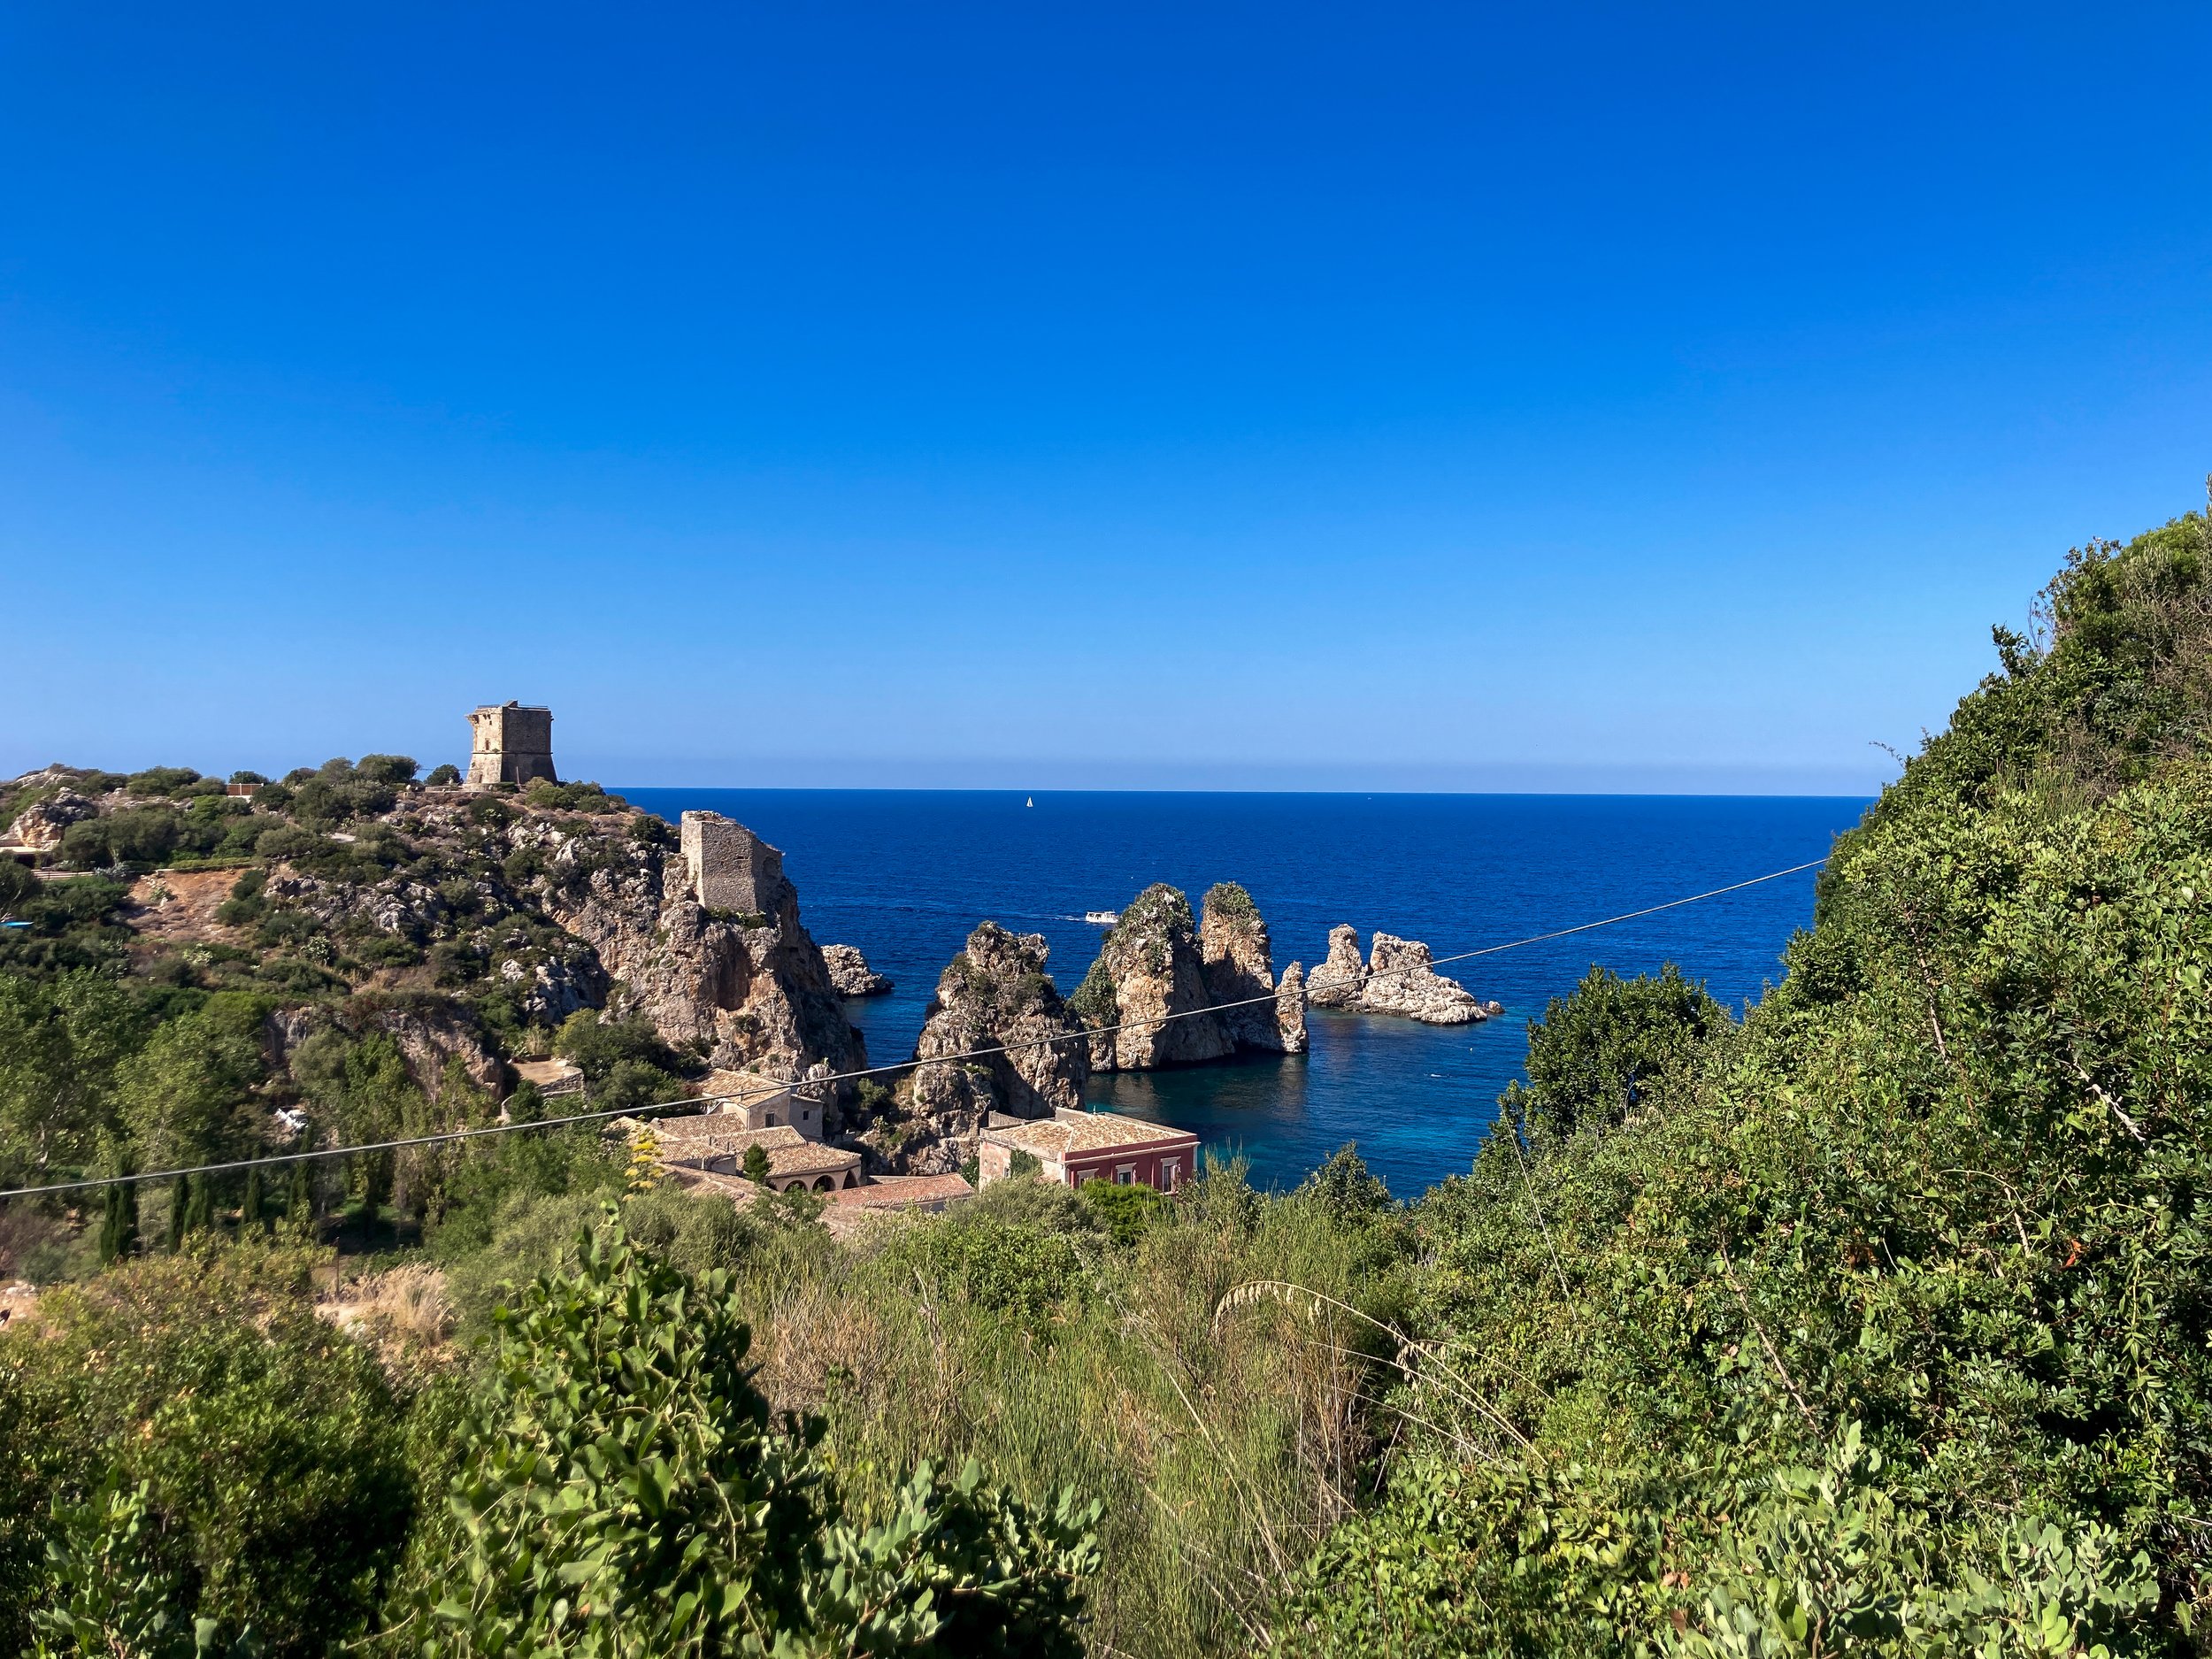  Figure 12. View of the Tonnara di Scopello from the path leading down to the water’s edge. Photograph by G. Vaccarino Gearty, 2022. 